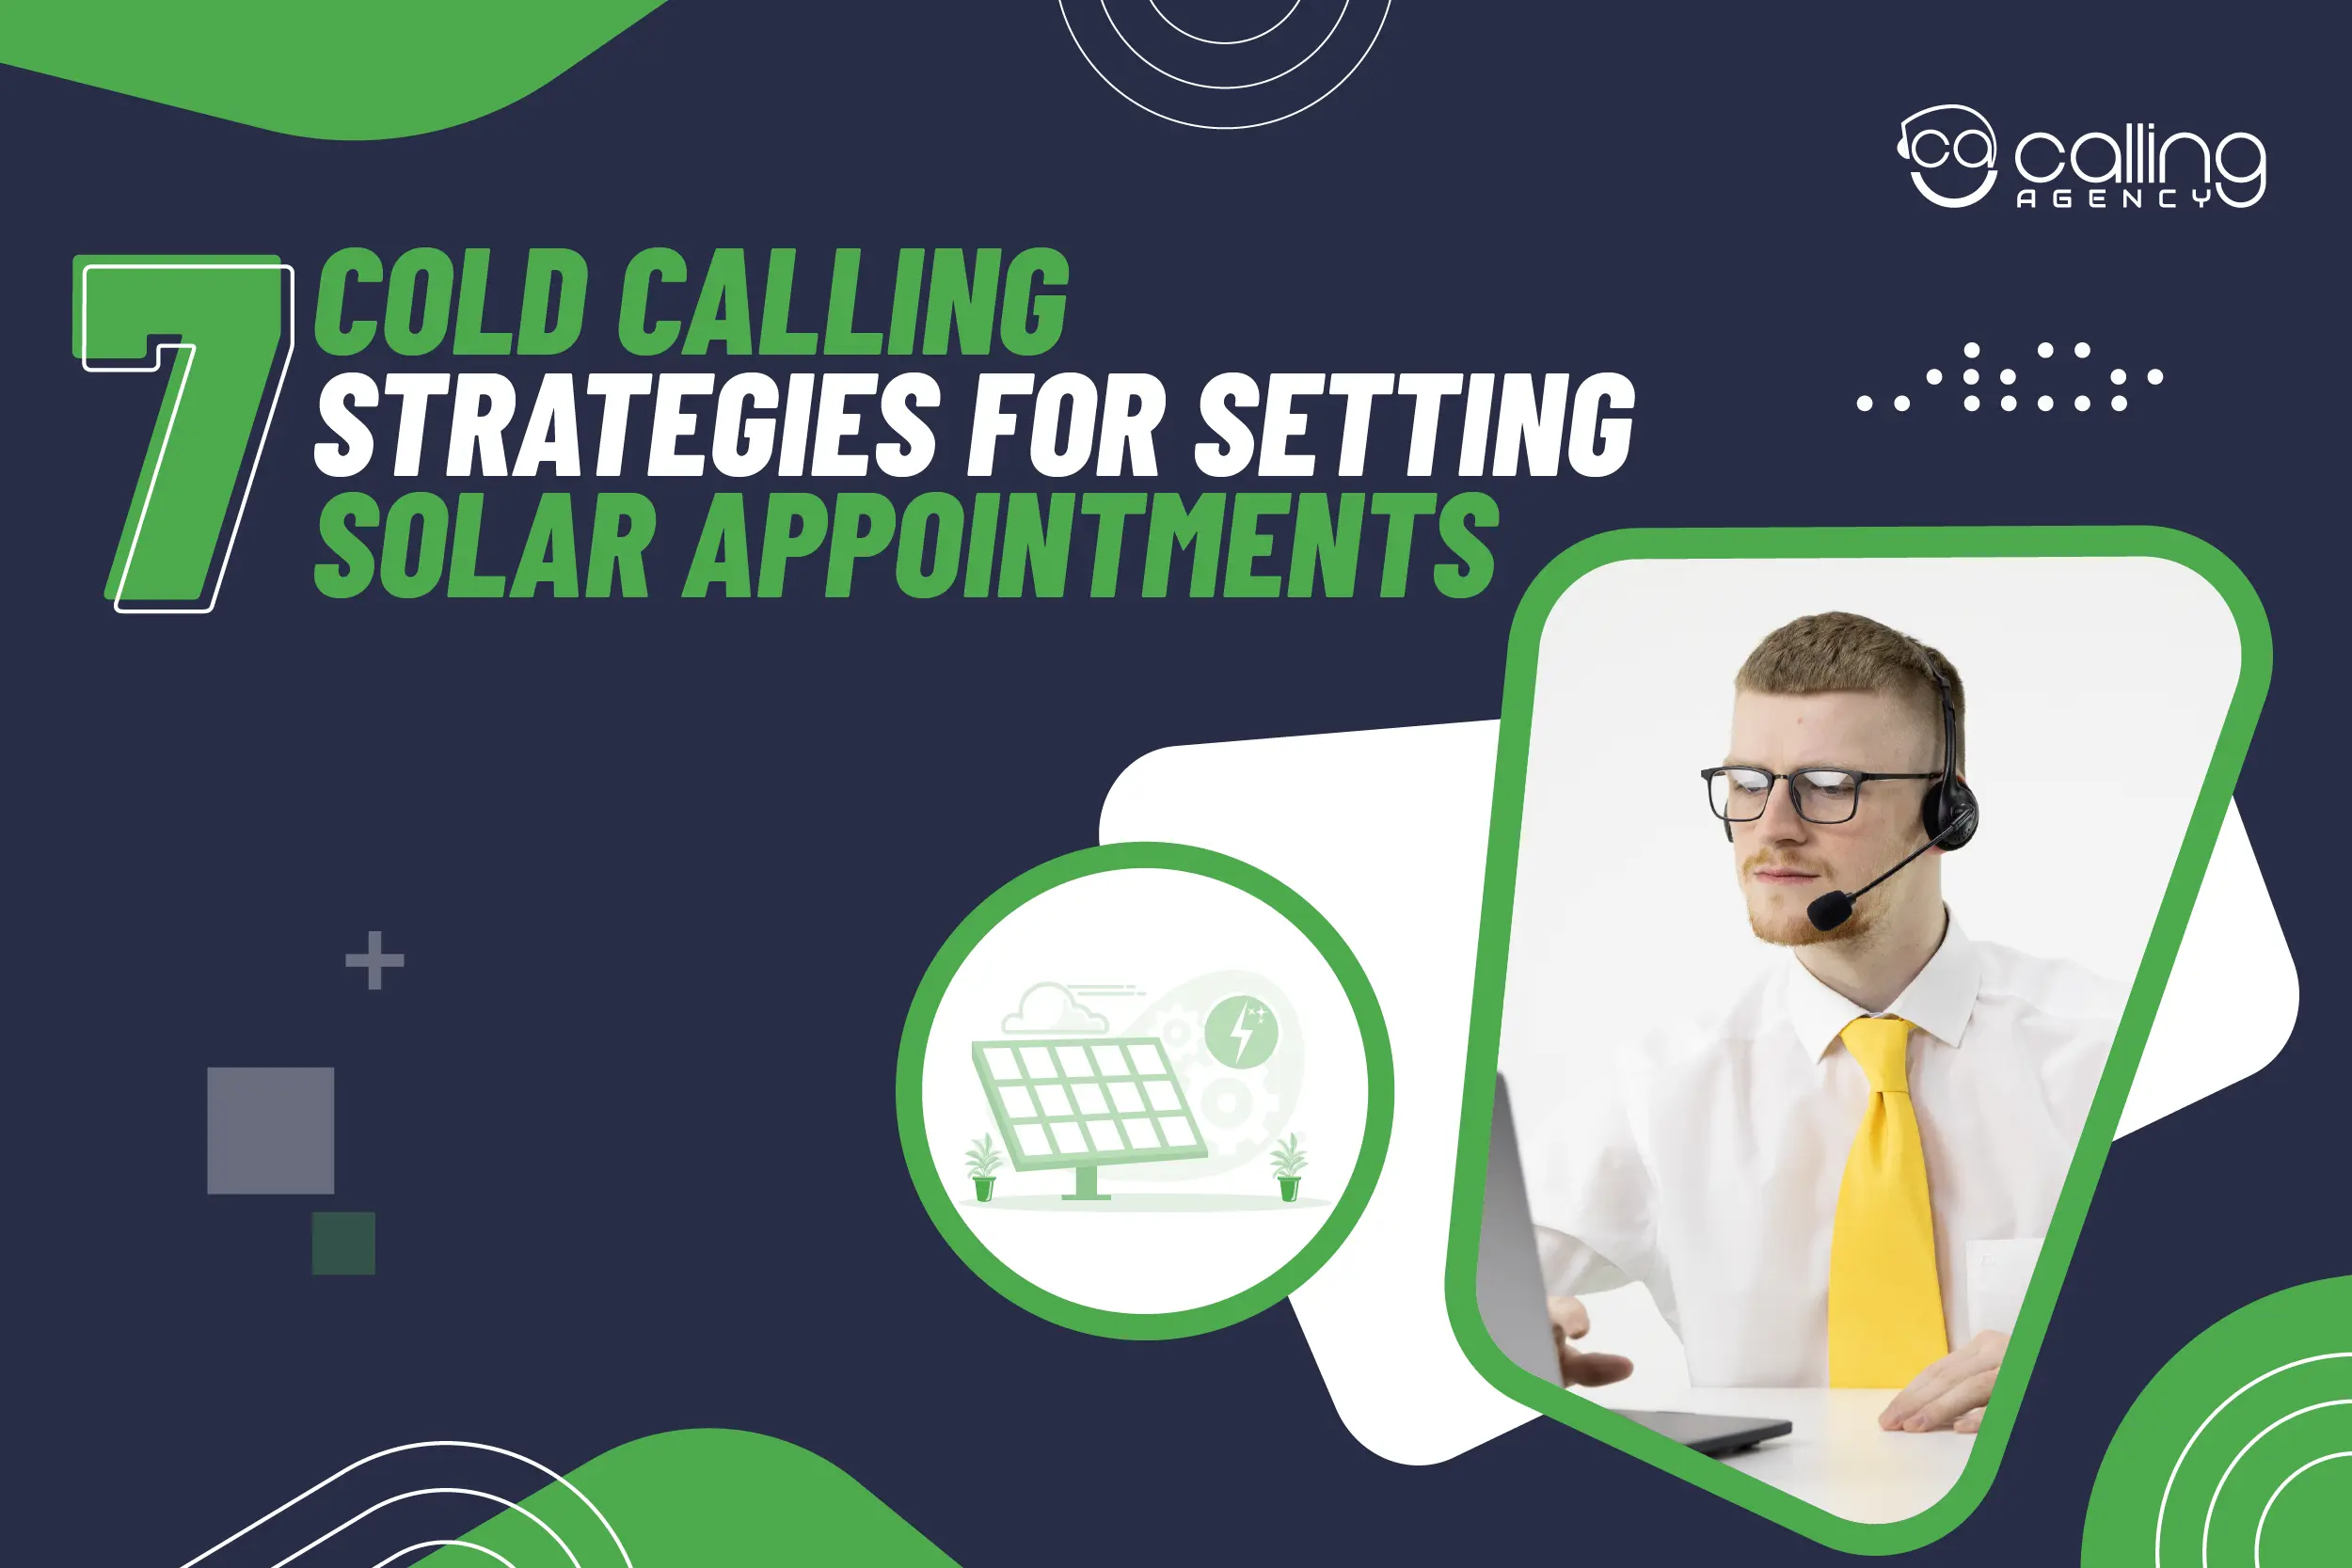 7 Cold Calling Strategies For Setting Solar Appointments [That No One Is Telling You]